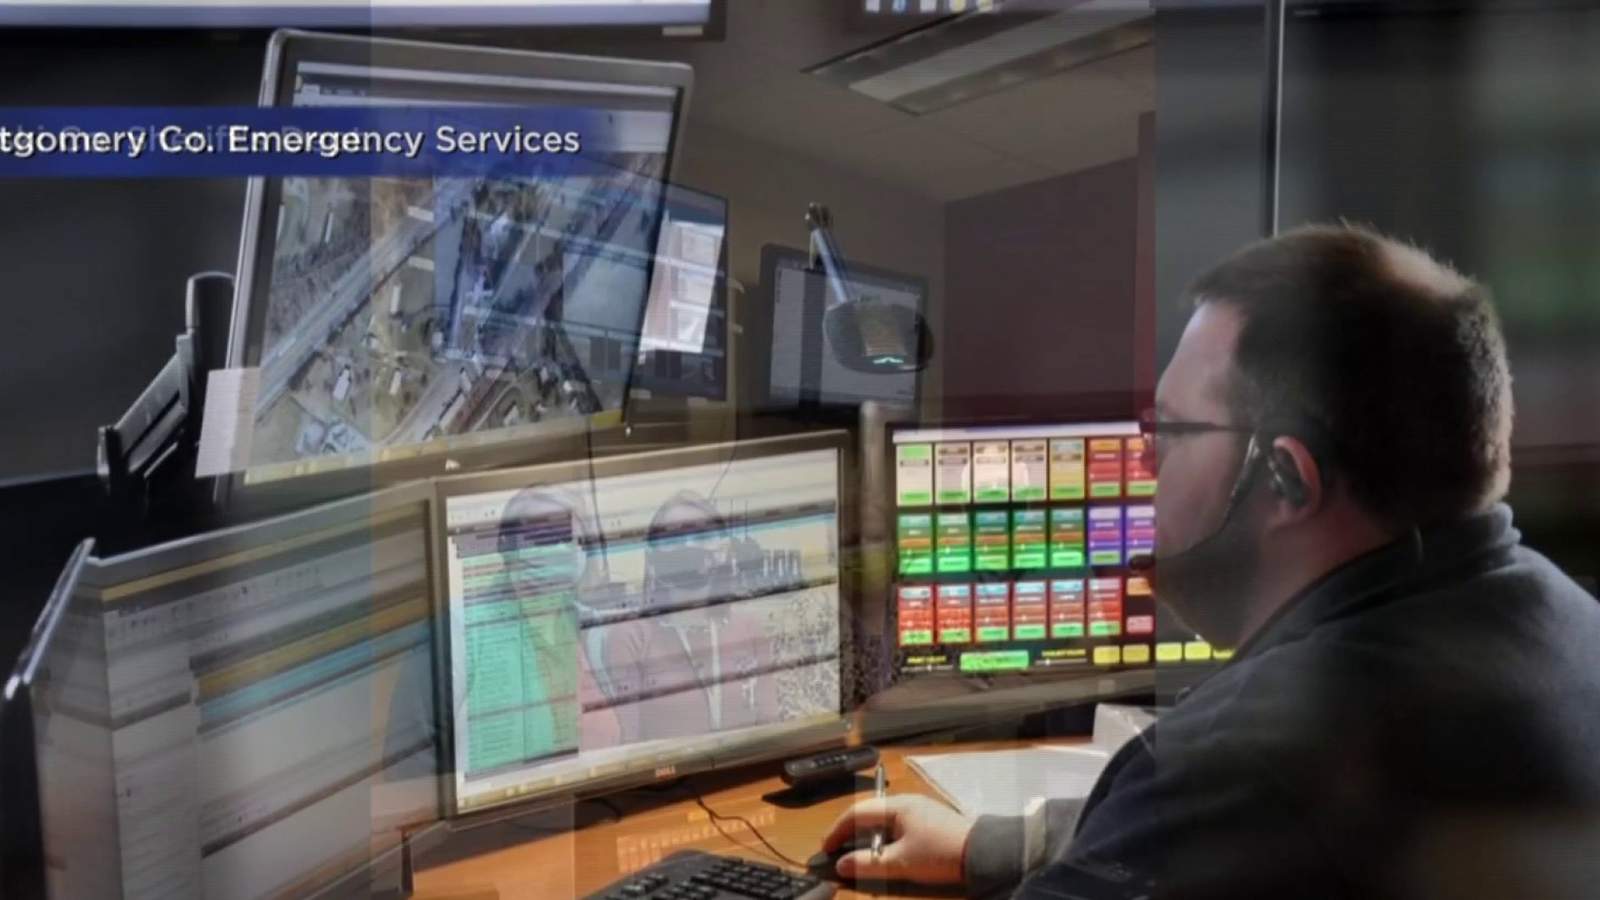 Southwest Virginia thanks its 911 dispatchers for working to keep community safe